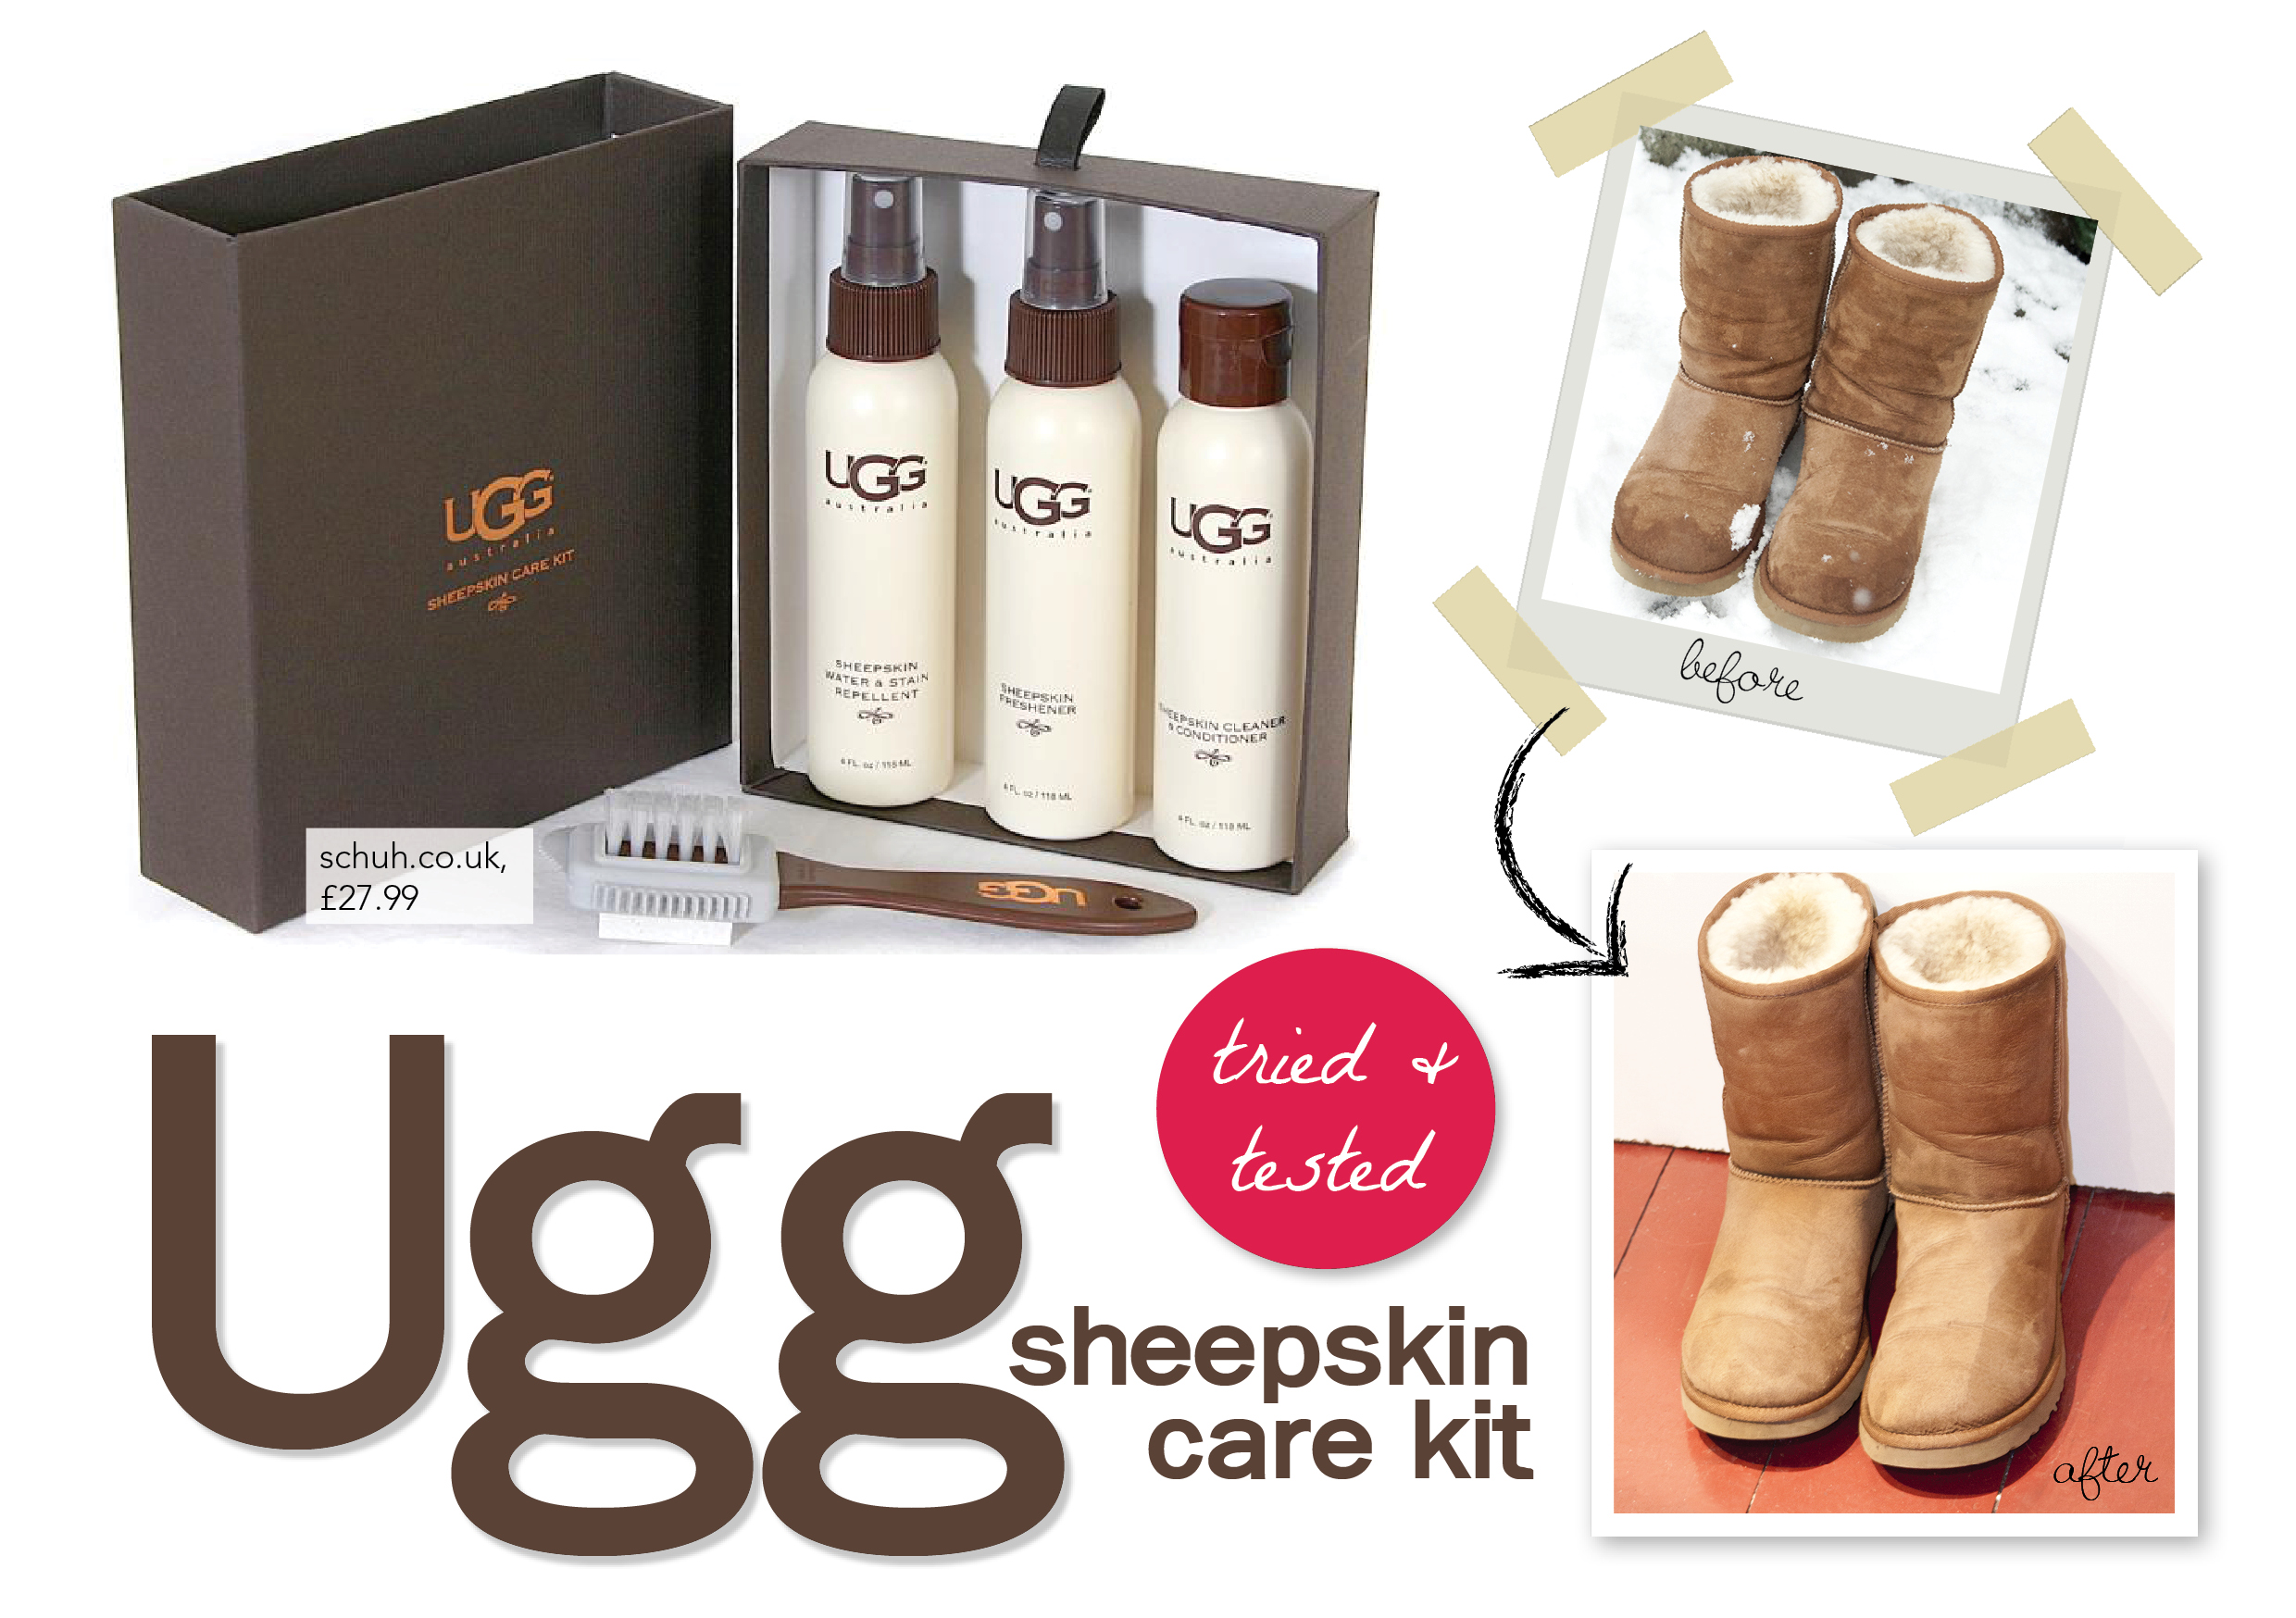 ugg cleaning kit before and after